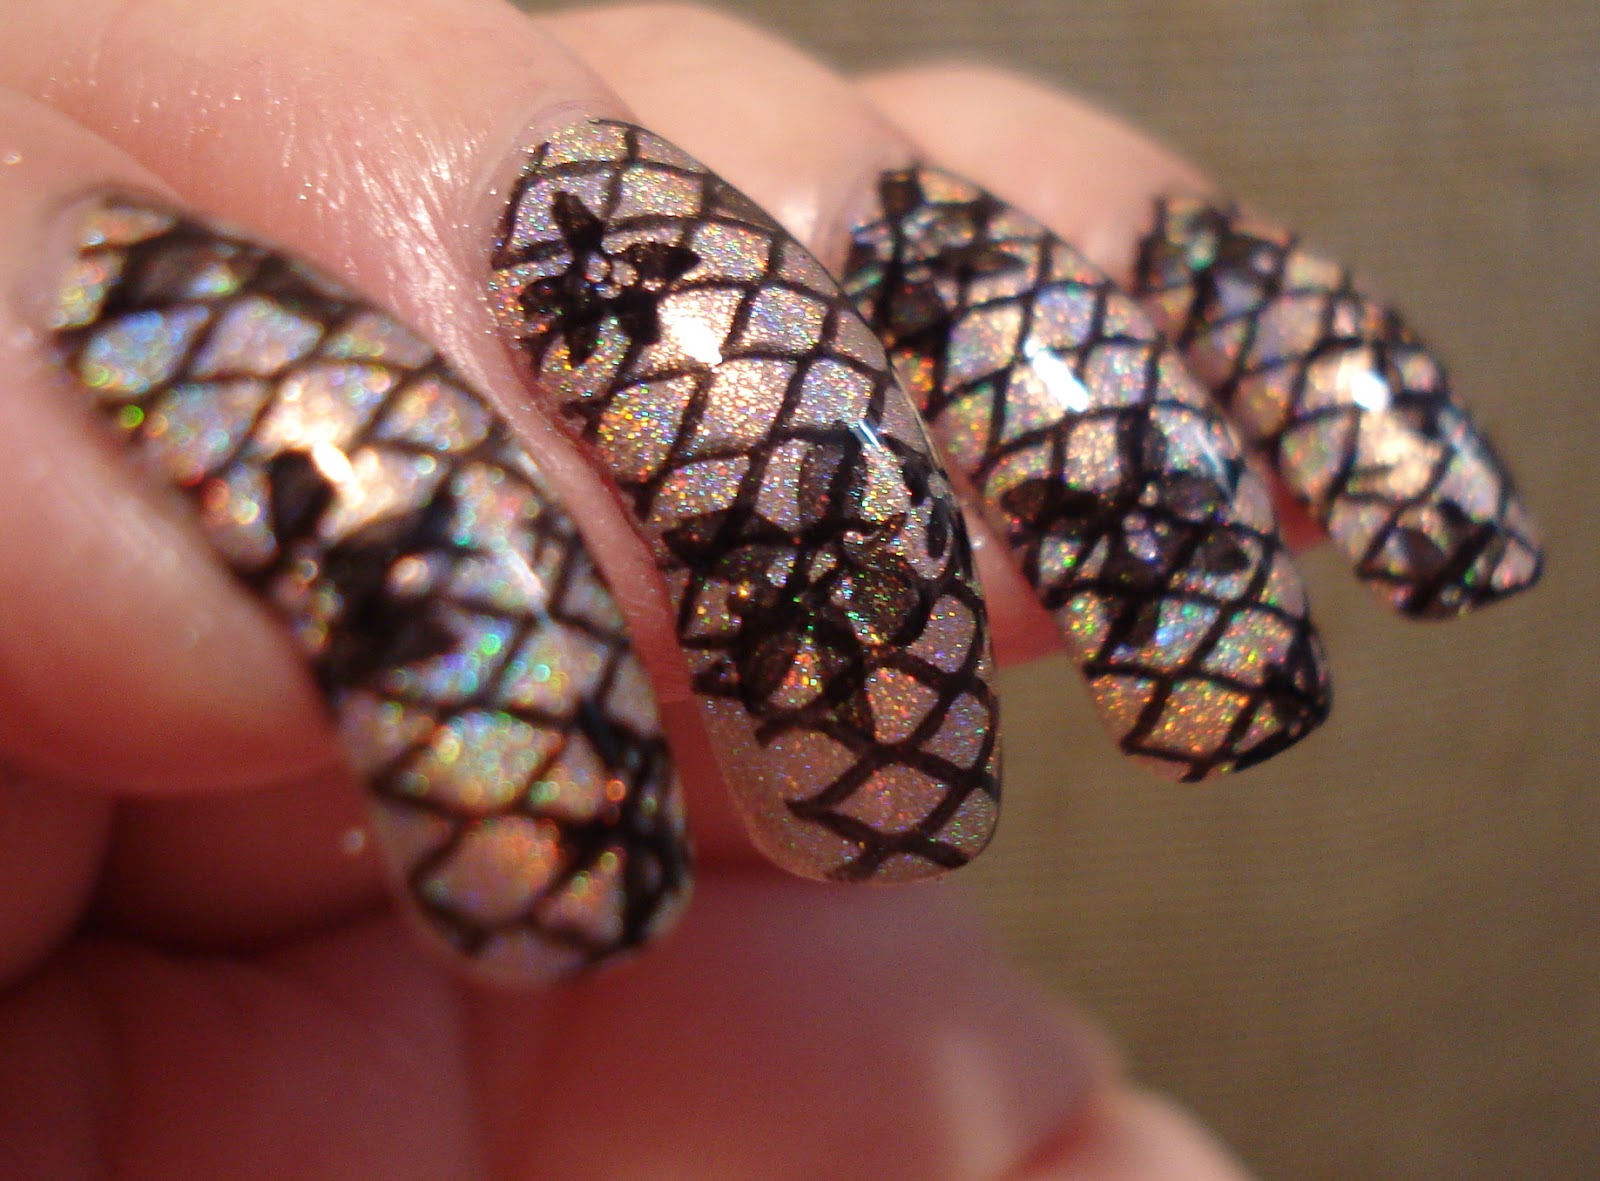 Nude and Black Lace Nail Art by RainbowsForKate on DeviantArt